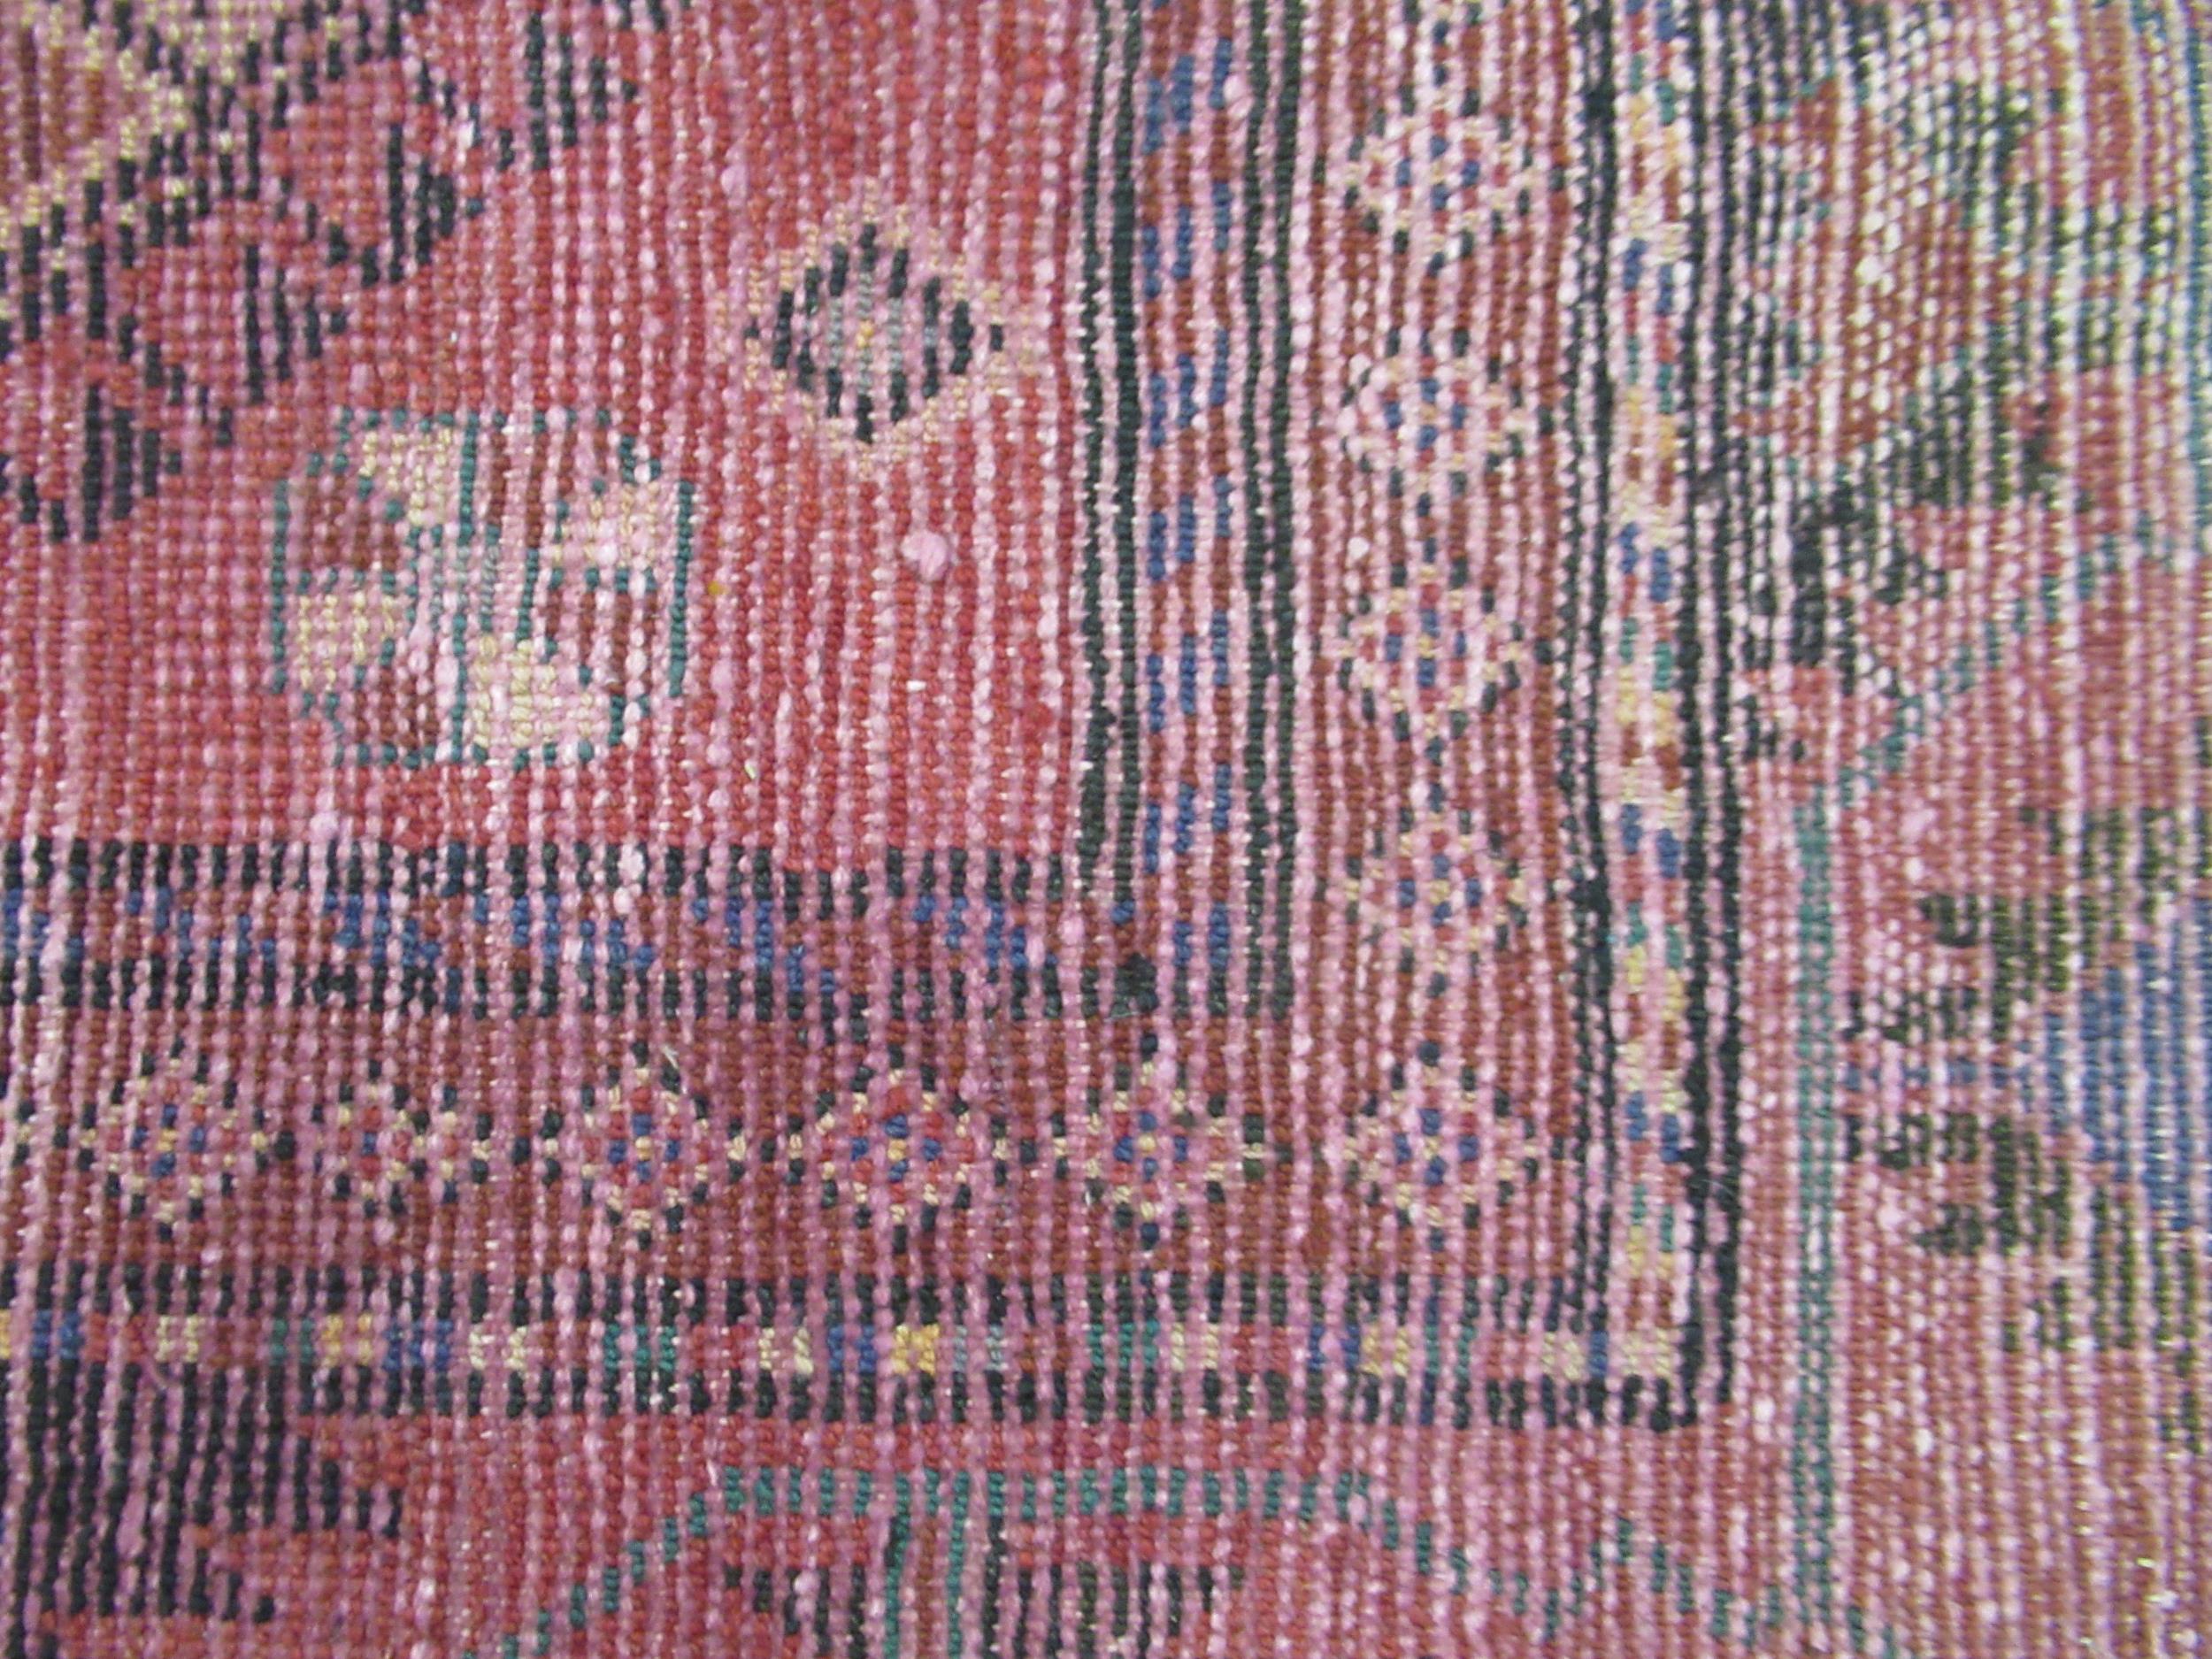 Modern Belouch style rug with an all over hooked medallion and panel design on a red ground with - Image 5 of 5